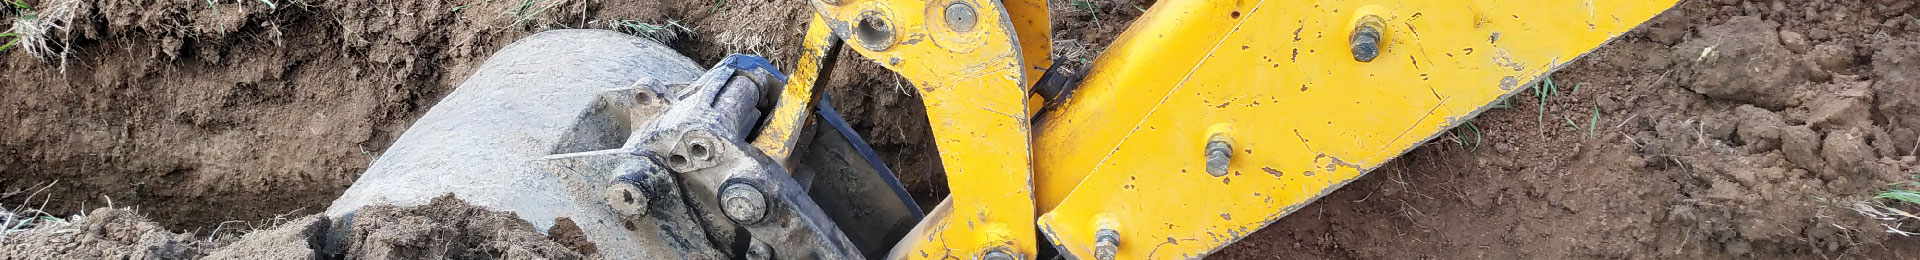 ID1920x260-Information-for-Builders-Excavator-Close-up